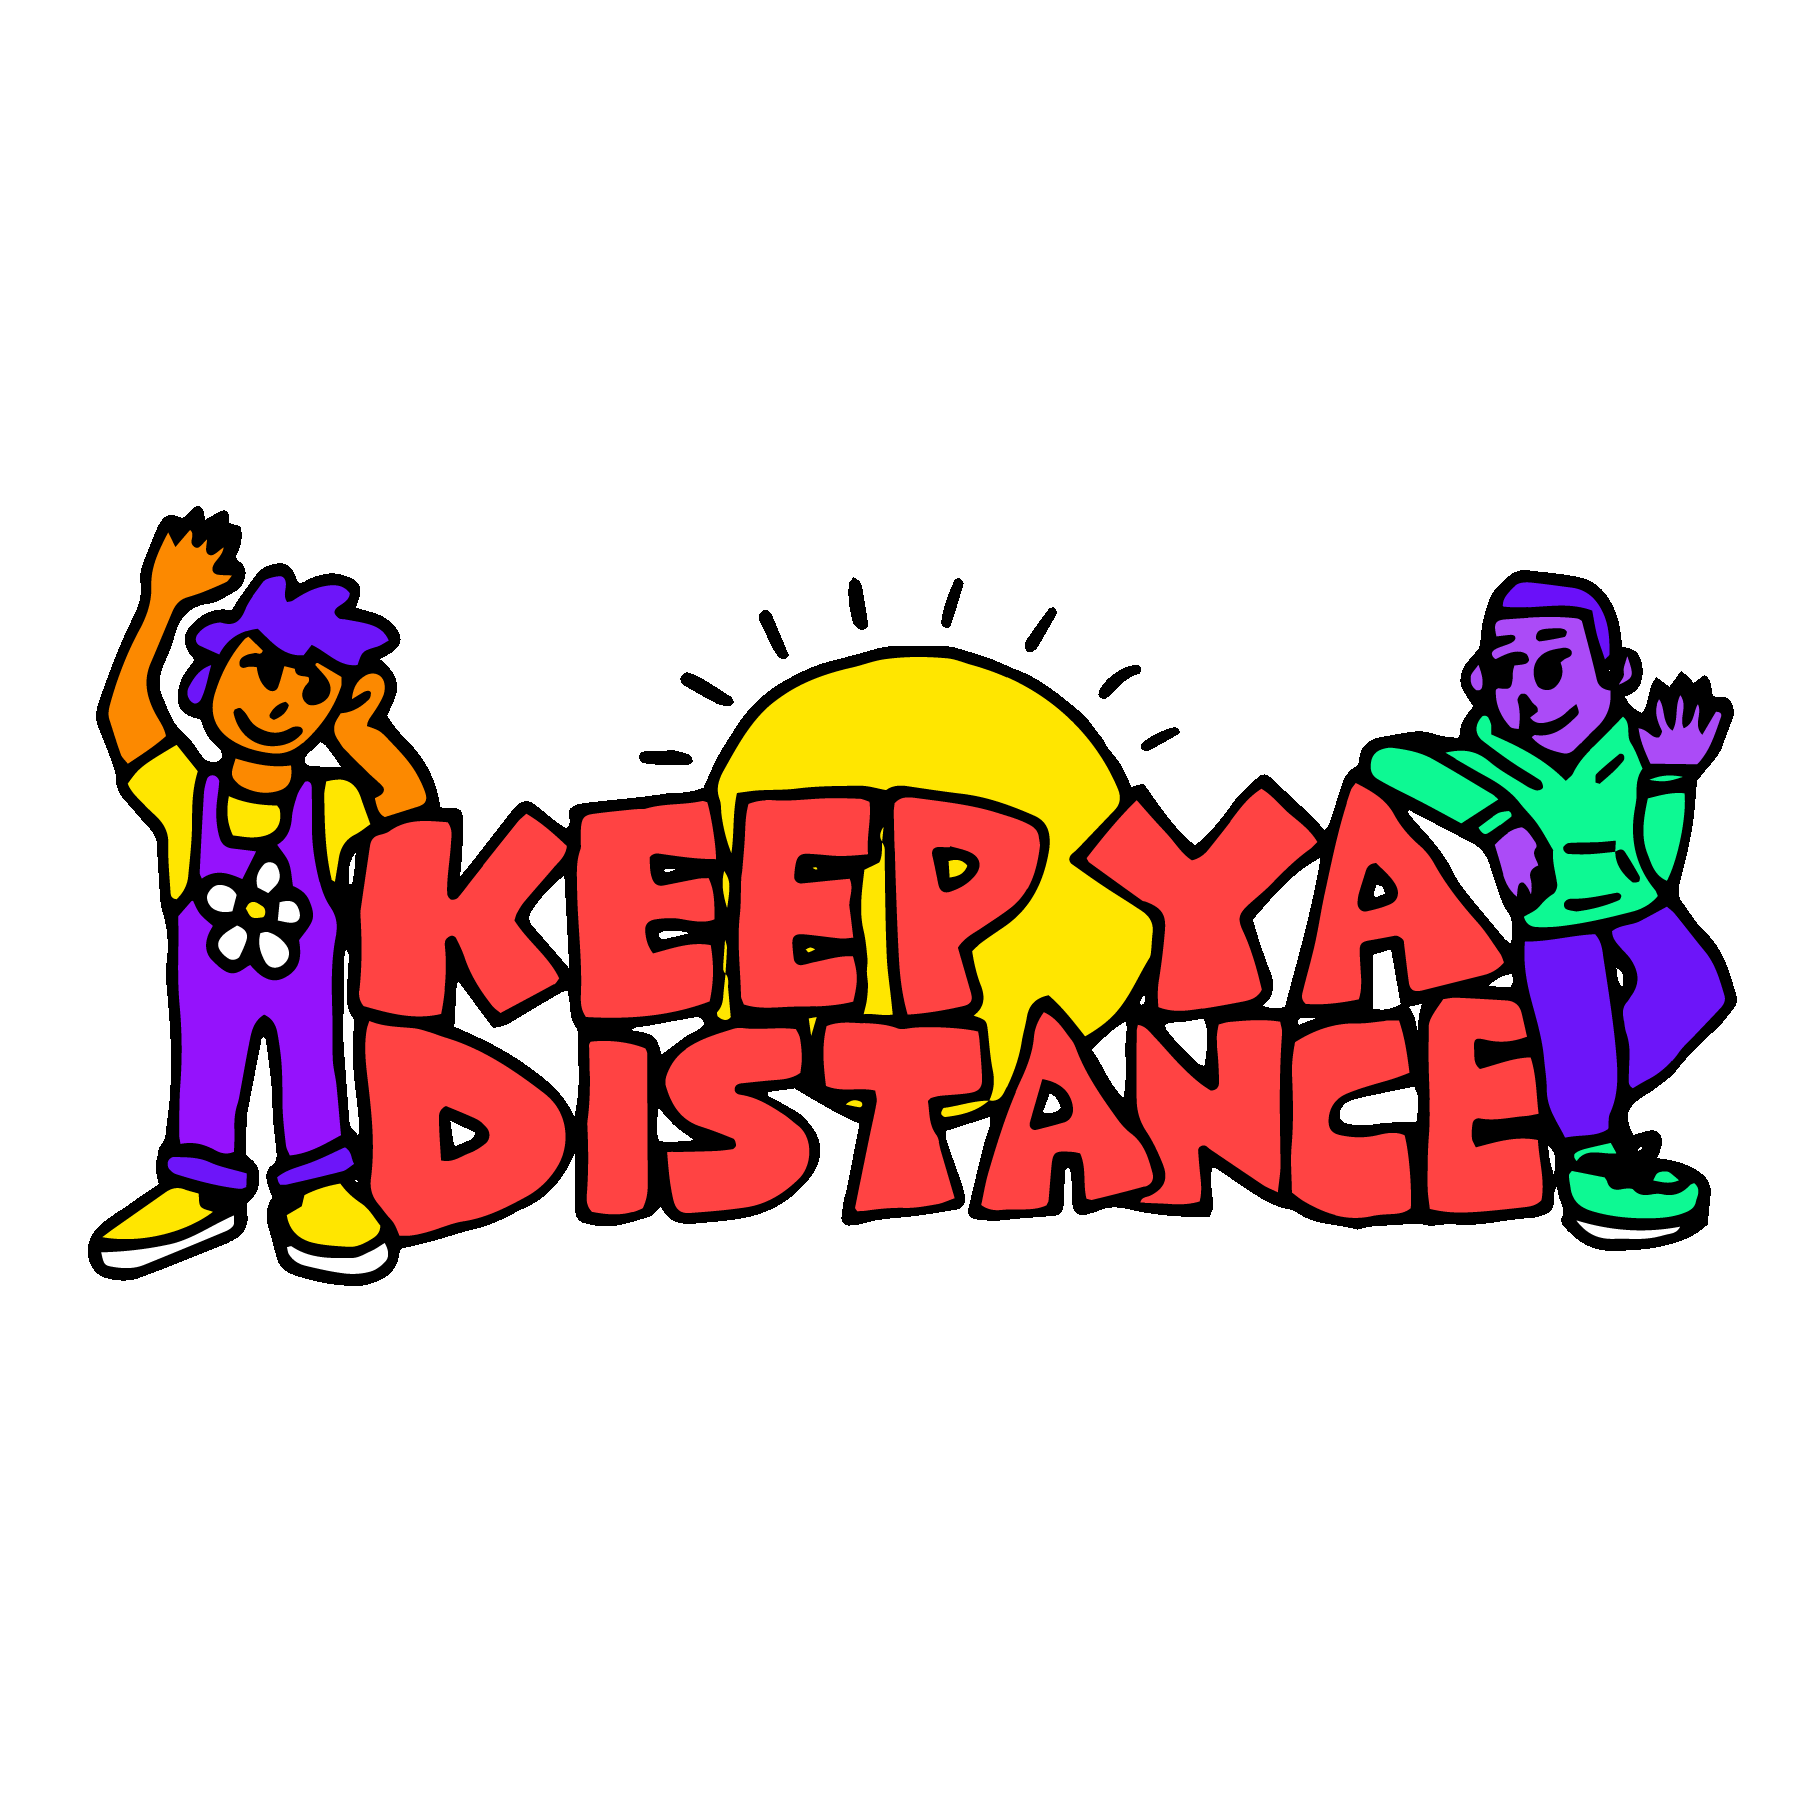 distance-revised.gif